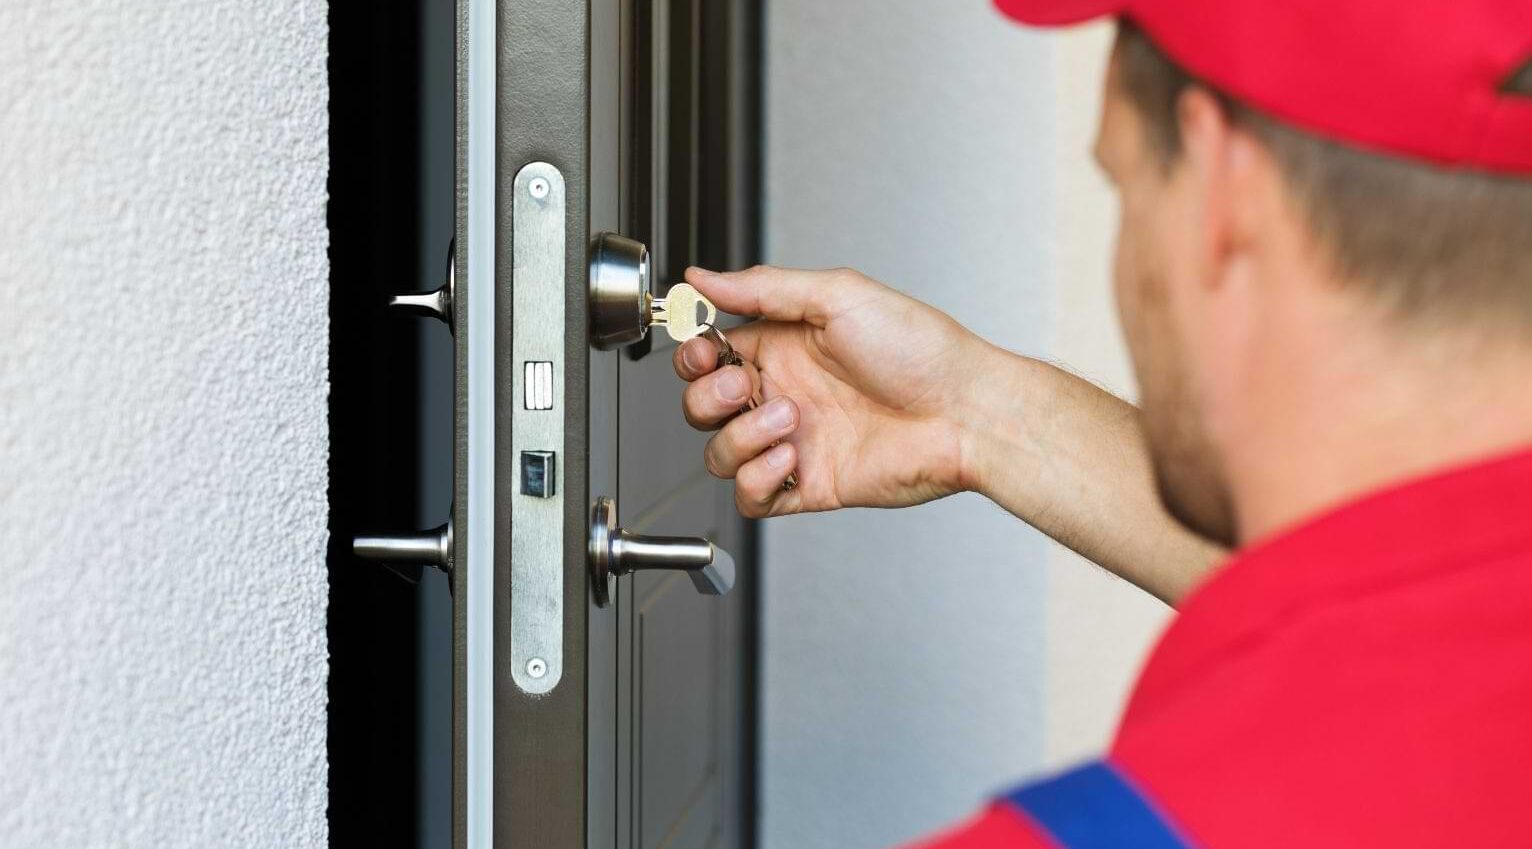 Tips to get the right locksmith